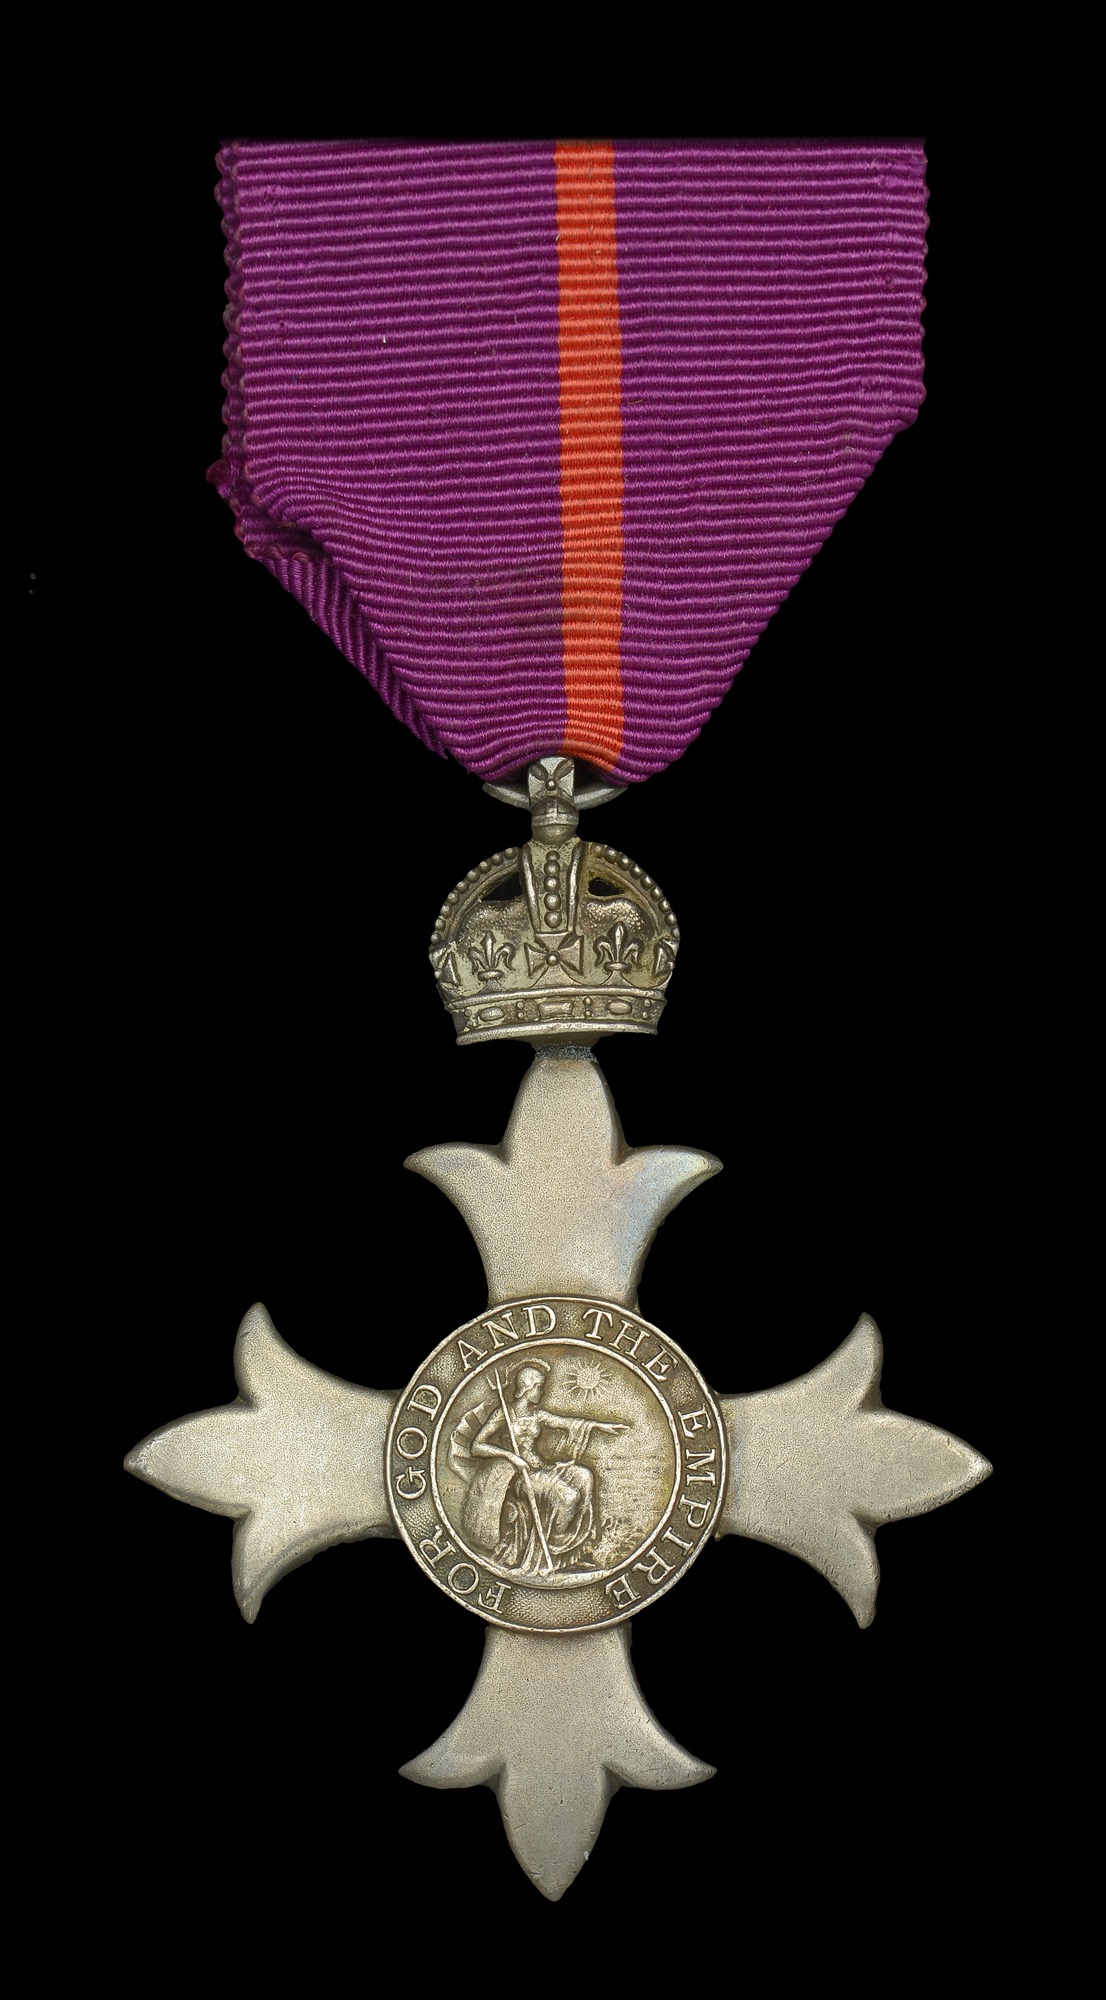 The Most Excellent Order of the British Empire, M.B.E. (Military) Member's 1st type breast b...